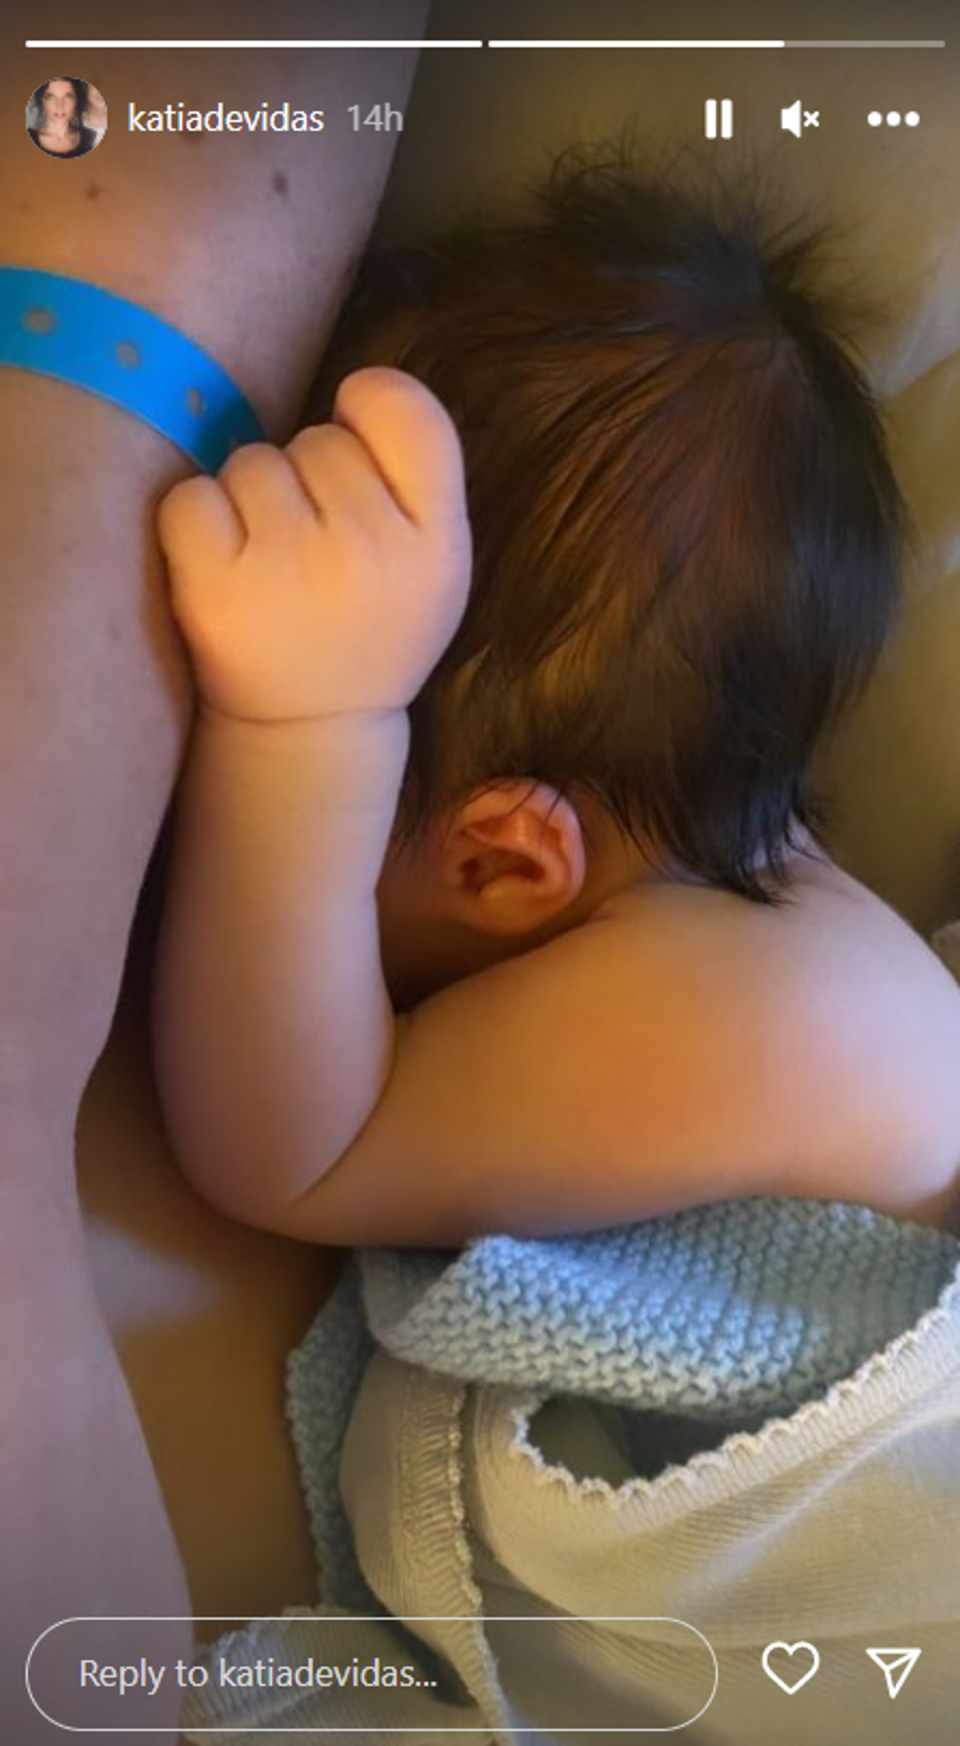 Another image gave fans a glimpse of the baby’s full head of hair (Instagram)